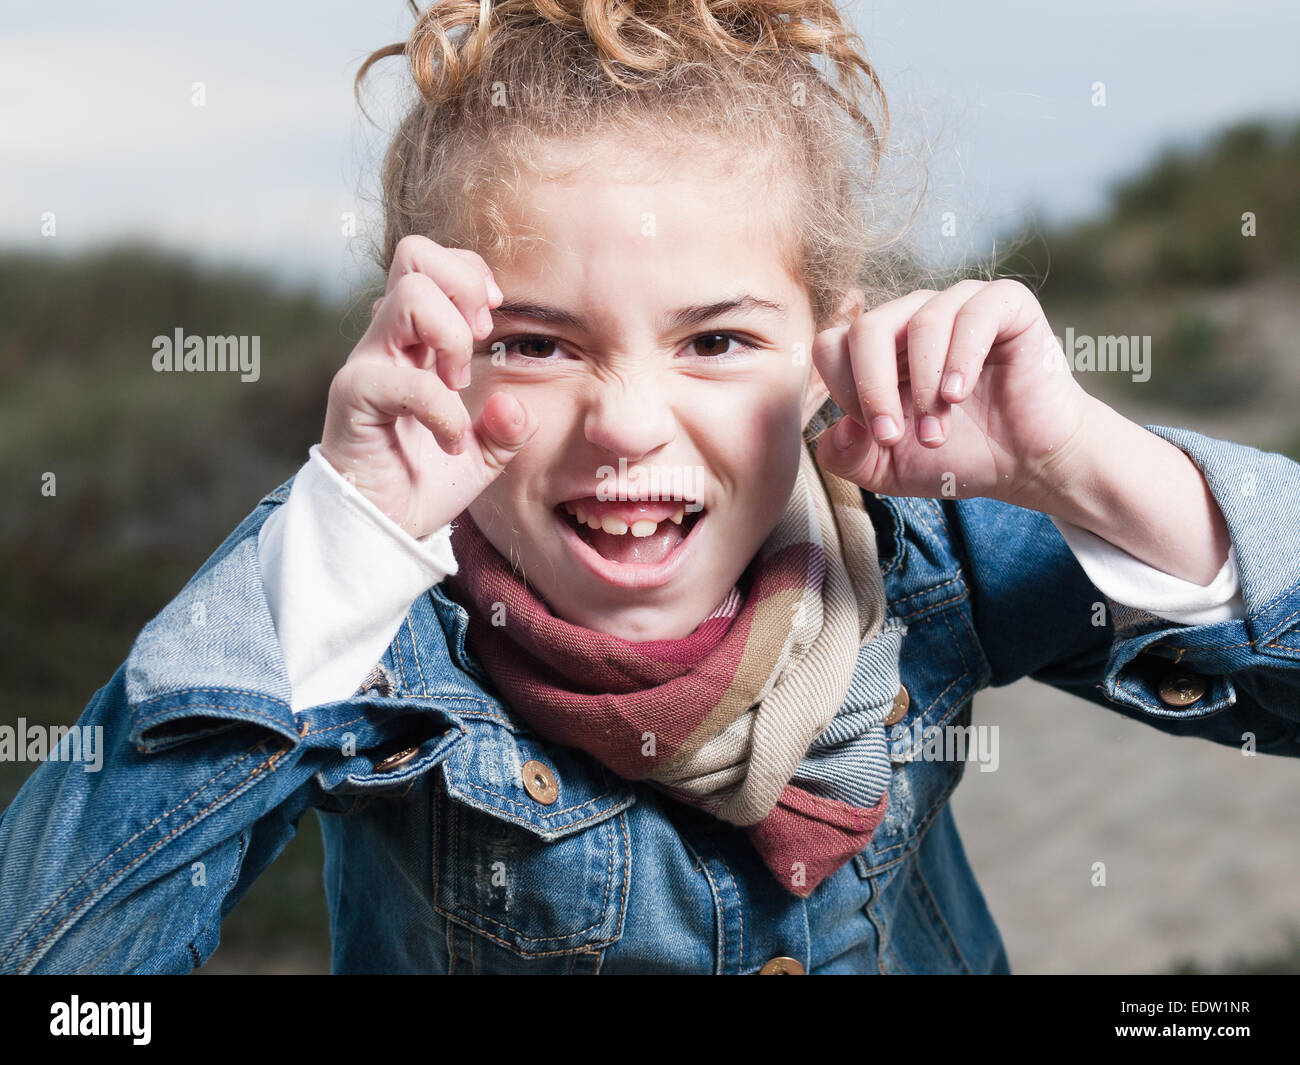 Blonde girl putting a frightening face outdoors Stock Photo